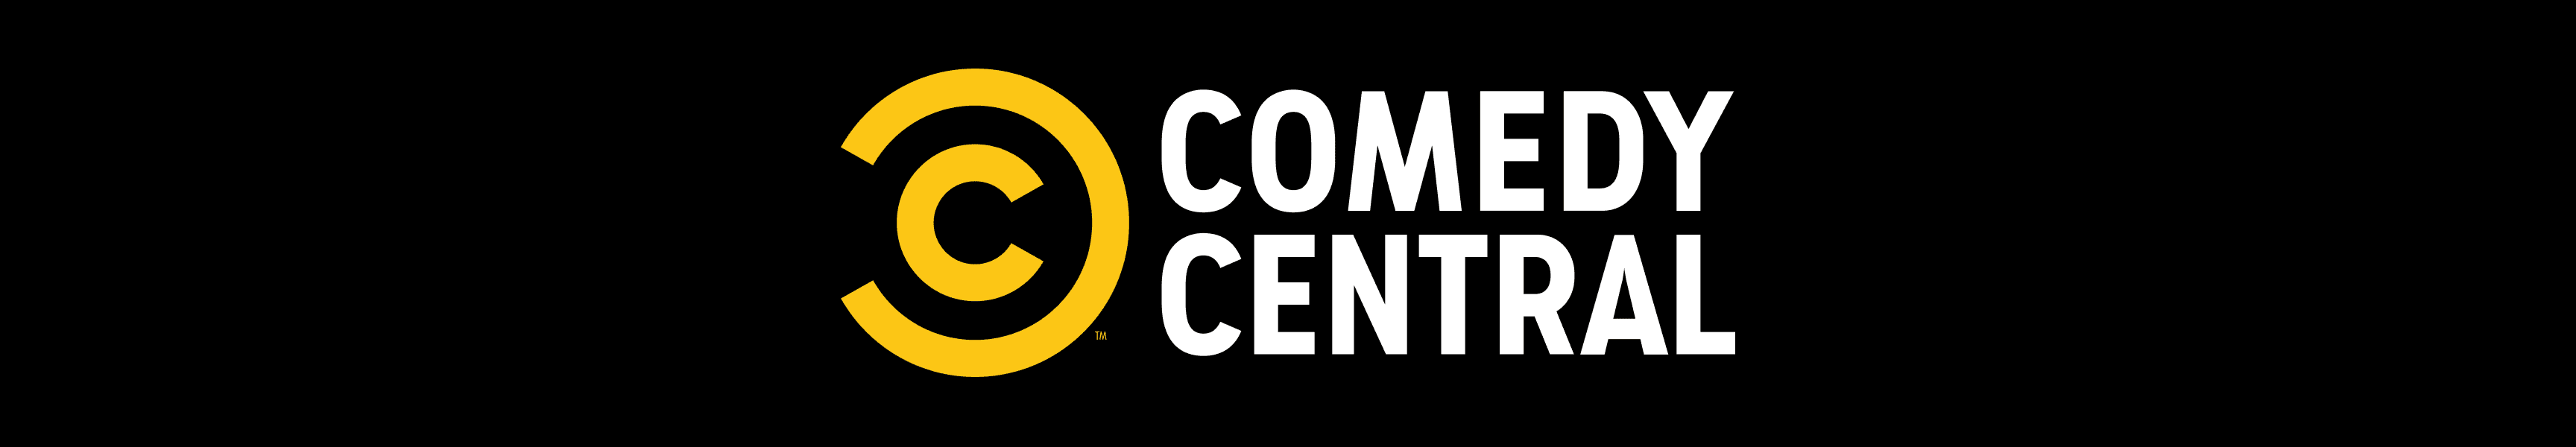 Comedy Central Kleidung